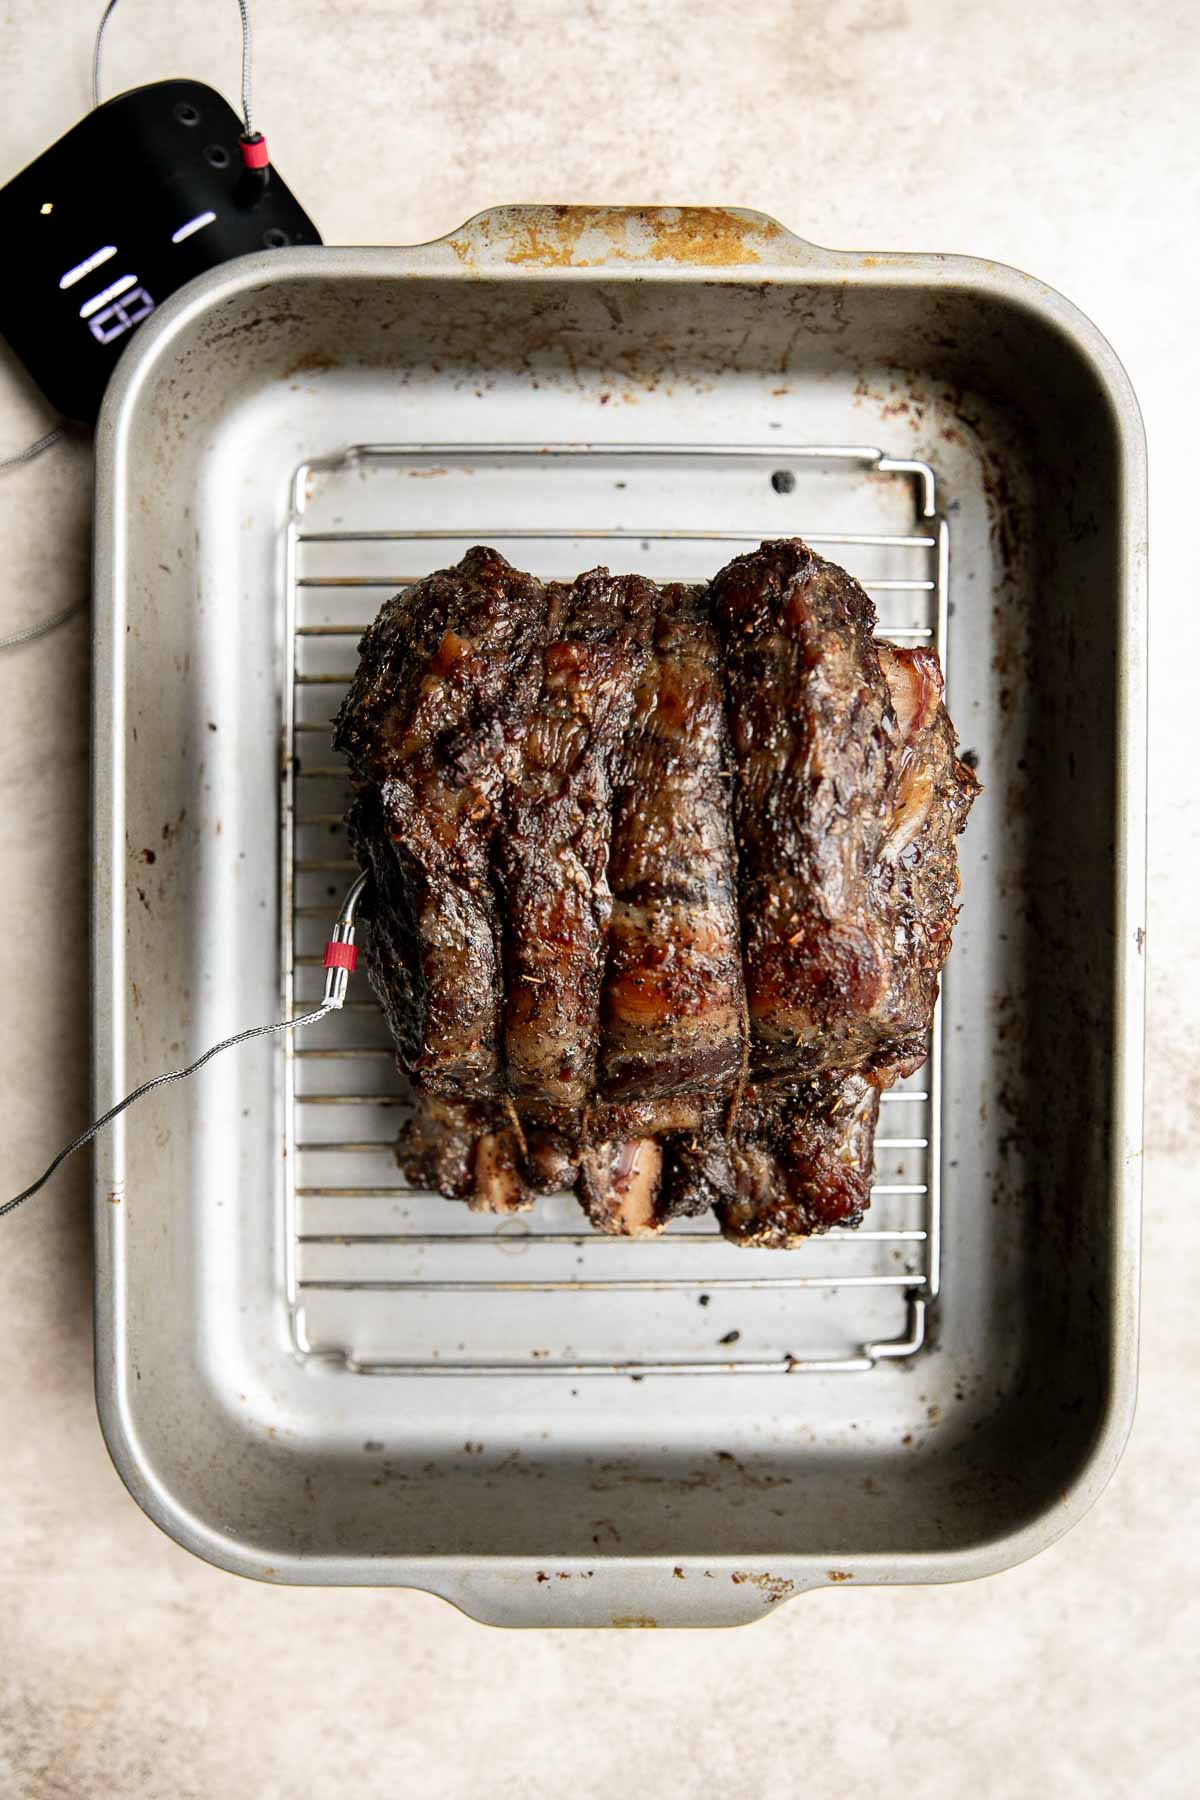 This Prime Rib Roast is a tender and juicy cut of beef marbled with fat. It is incredibly flavorful, delicious, and good — flavored with simple ingredients. | aheadofthyme.com